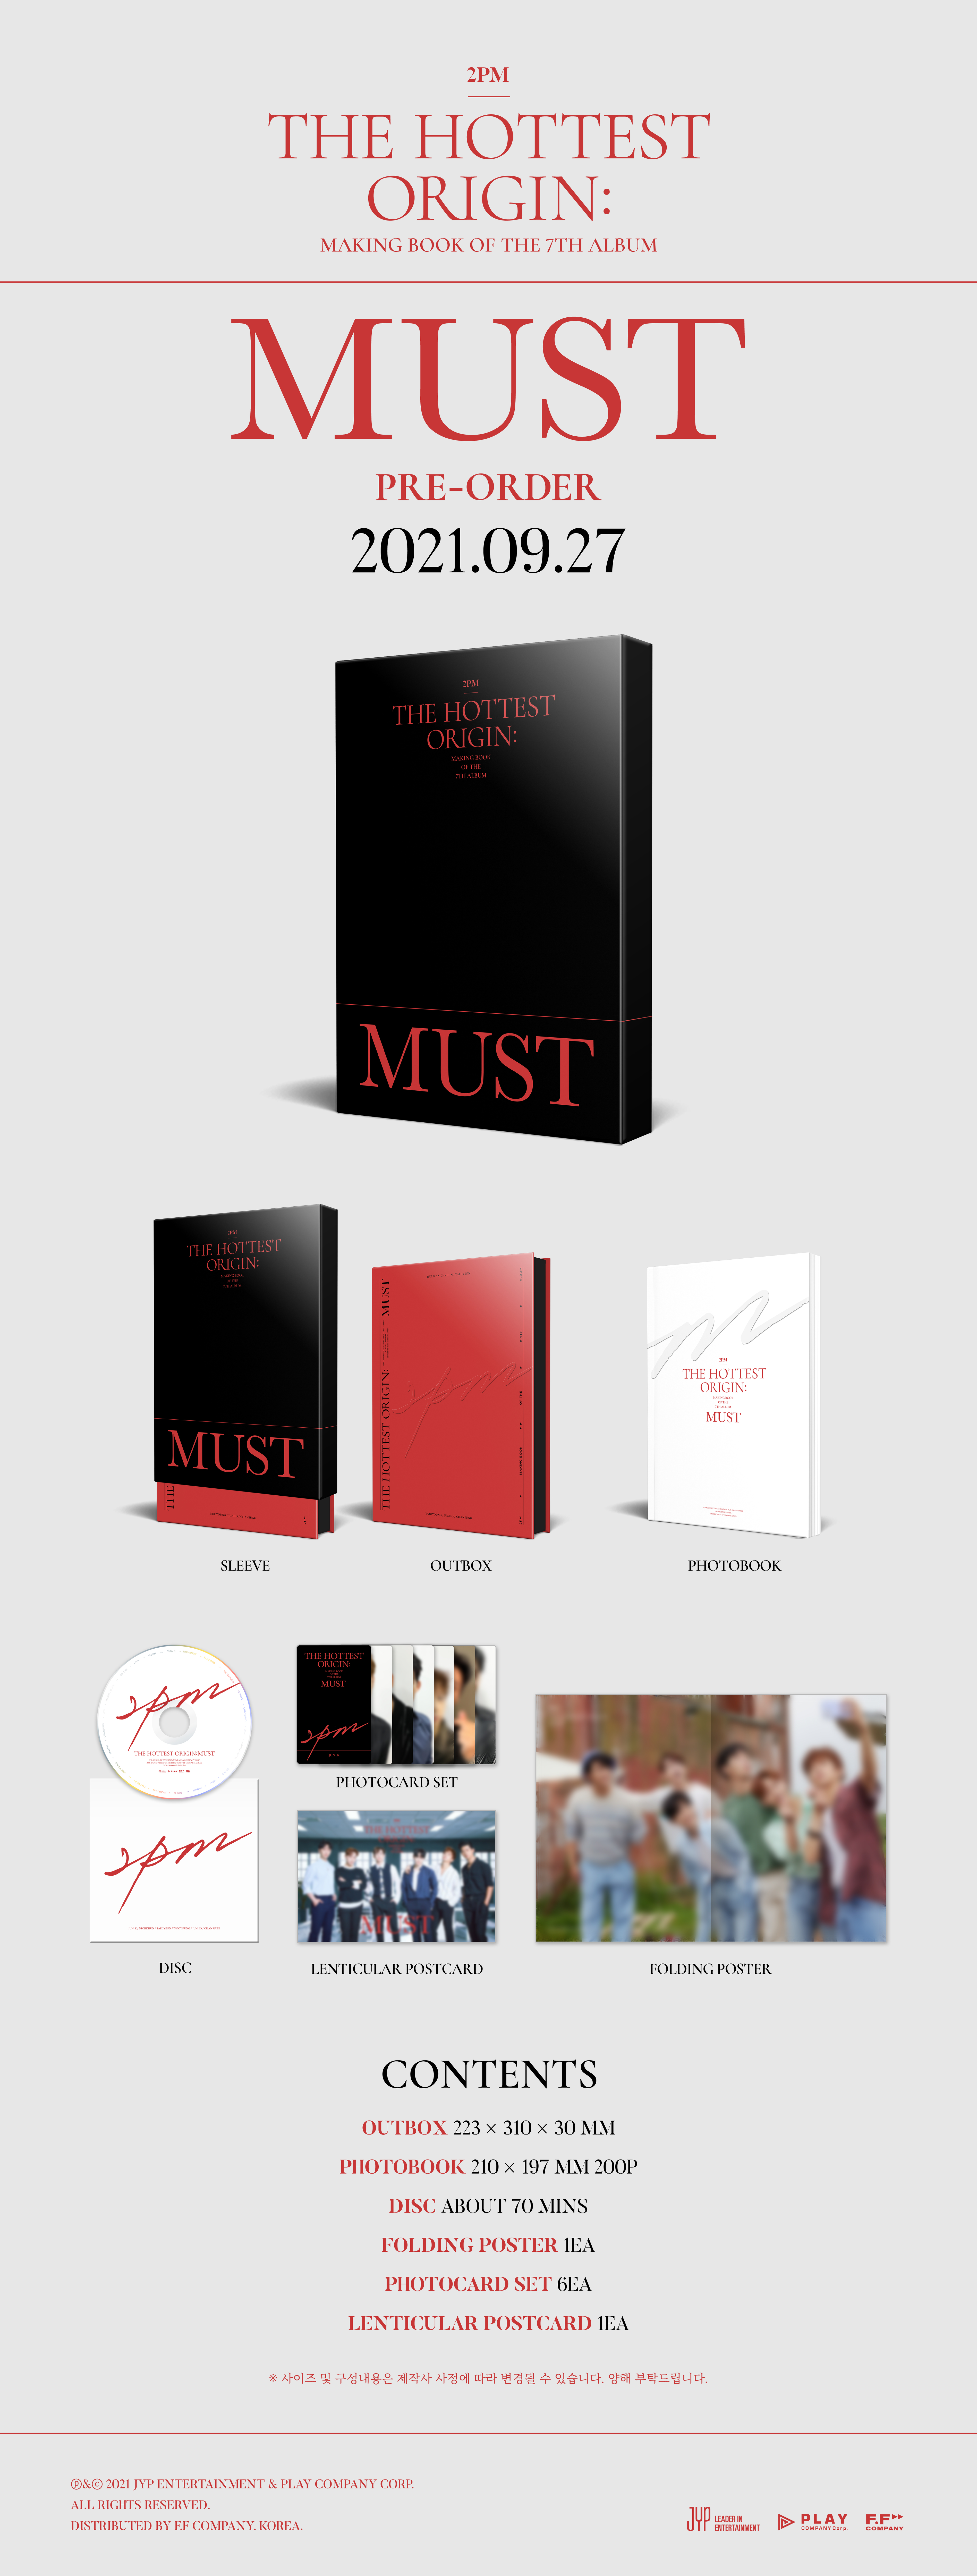 2PM｜DVD付きフォトブック『2PM THE HOTTEST ORIGIN: MUST MAKING BOOK